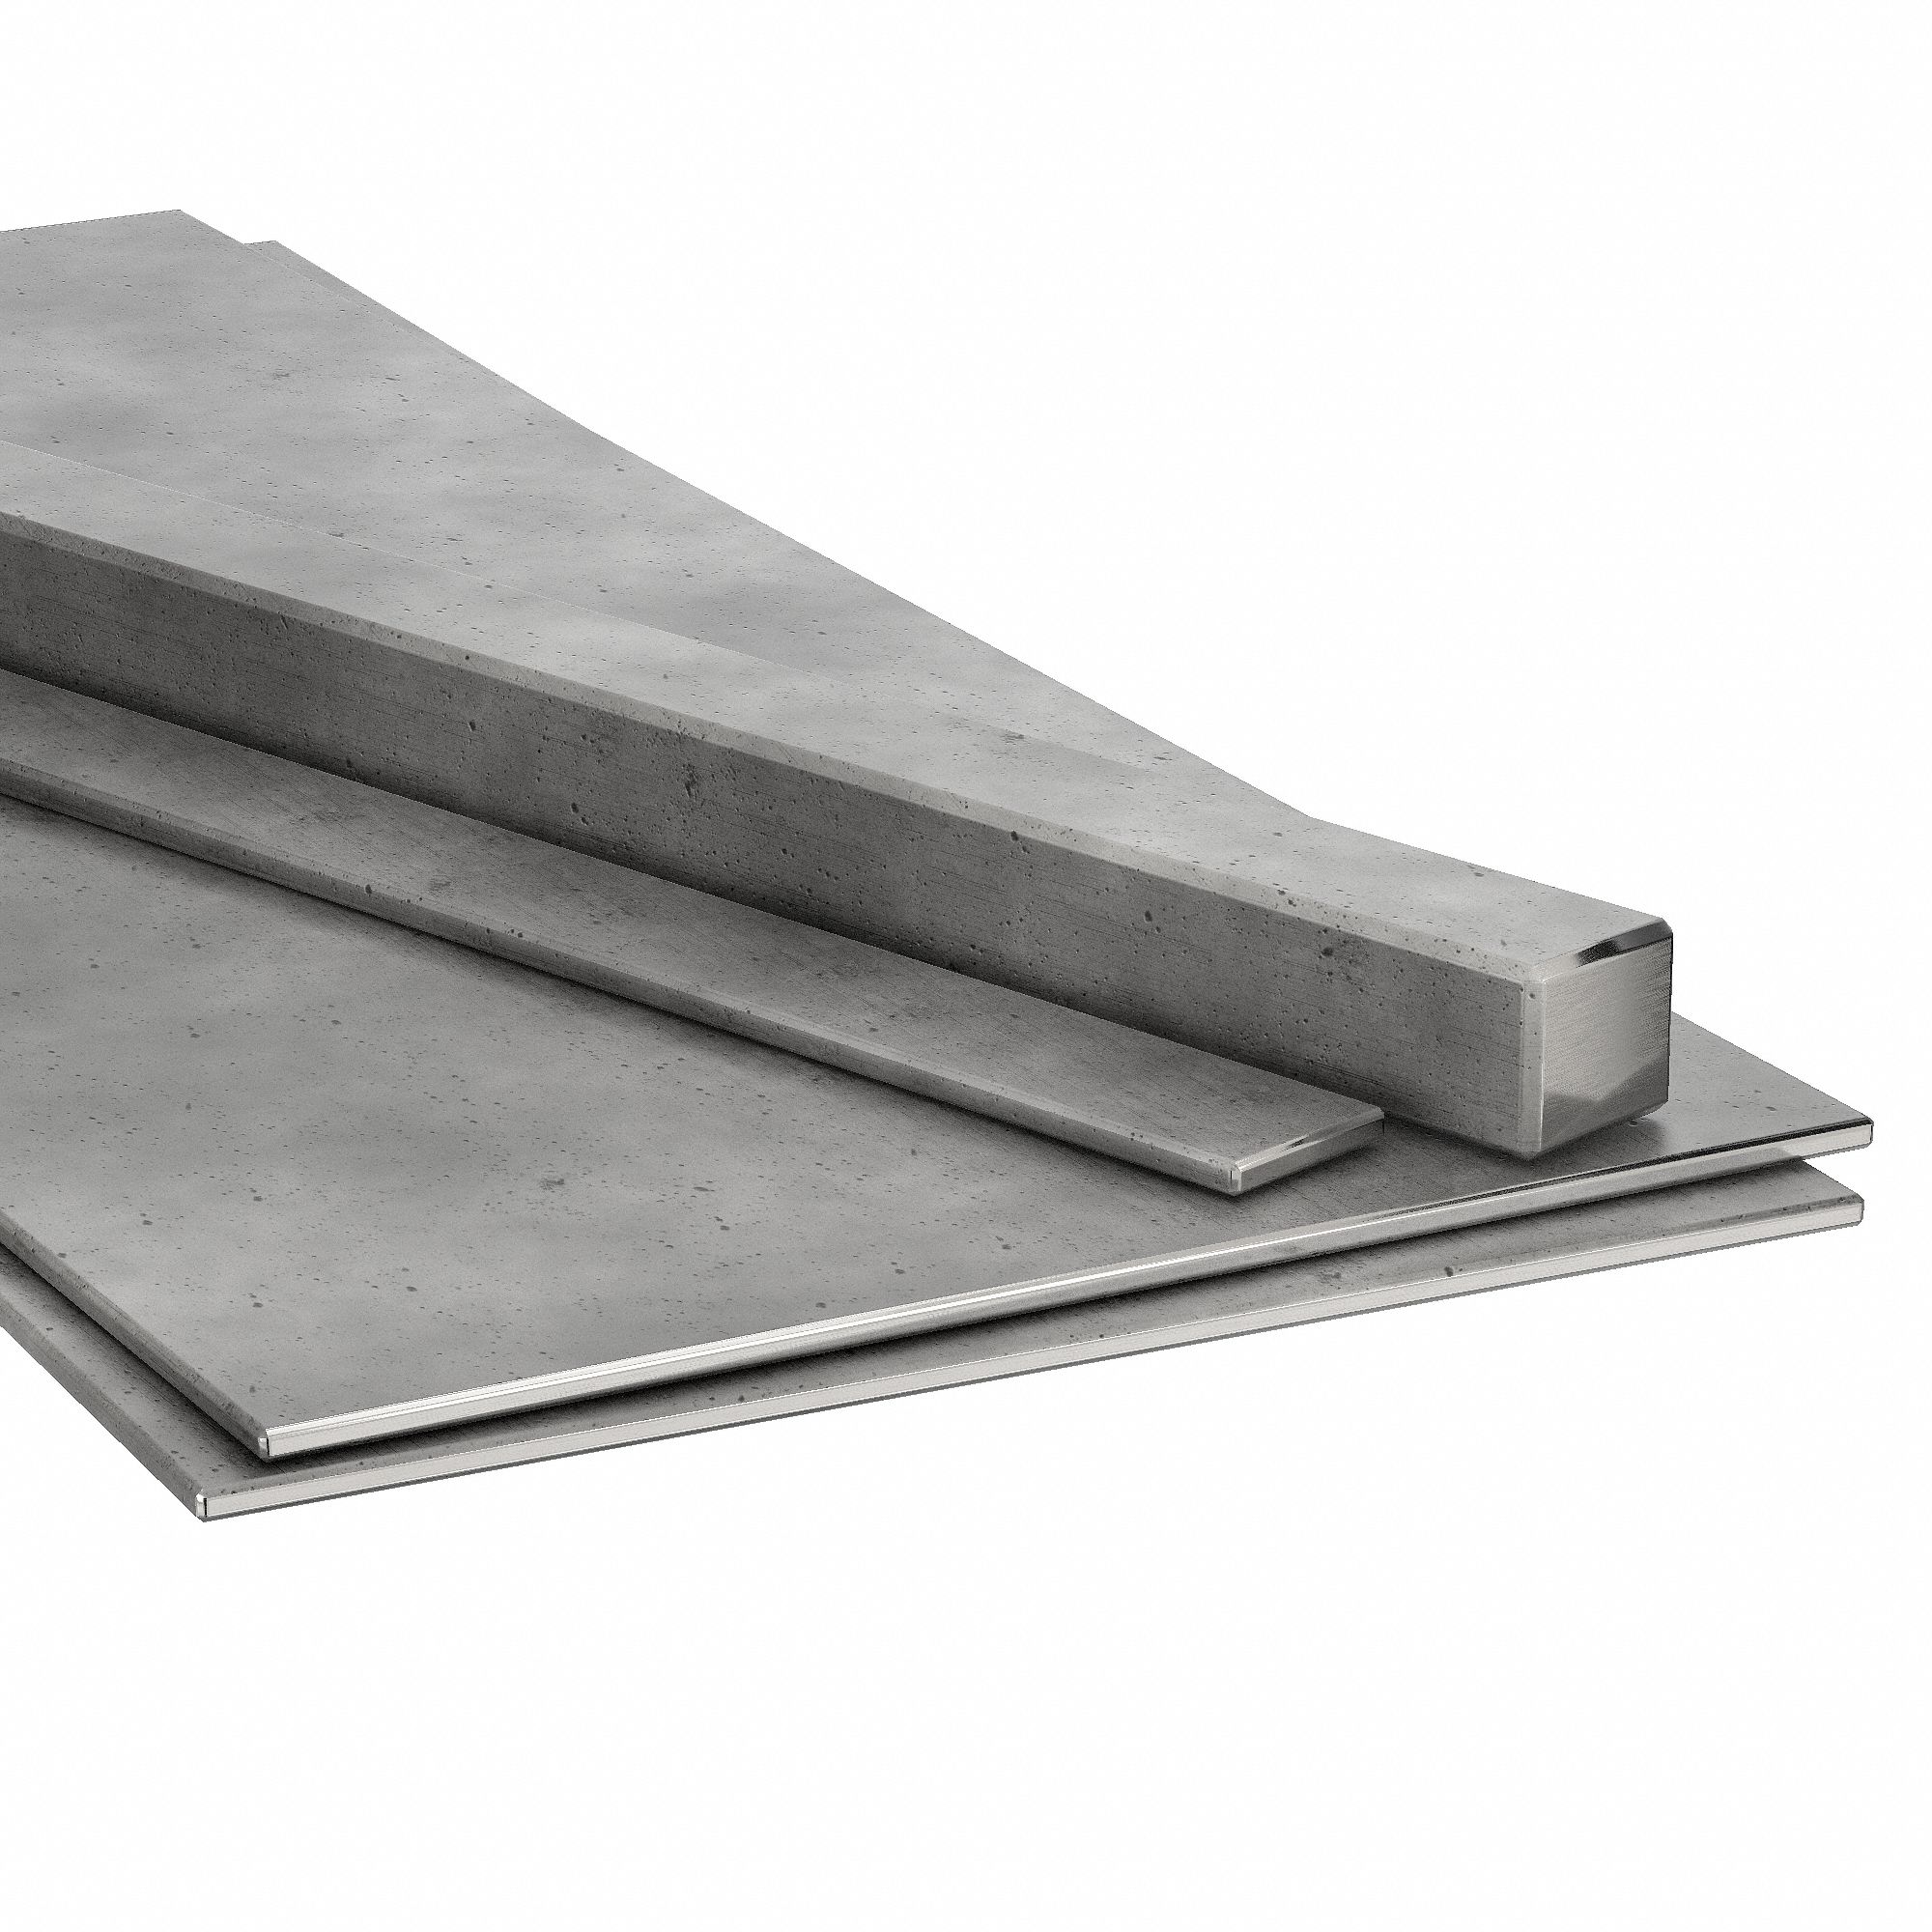 0.25in Thick 1-1/2in x 12in x 1/4in Steel Flat Plate 